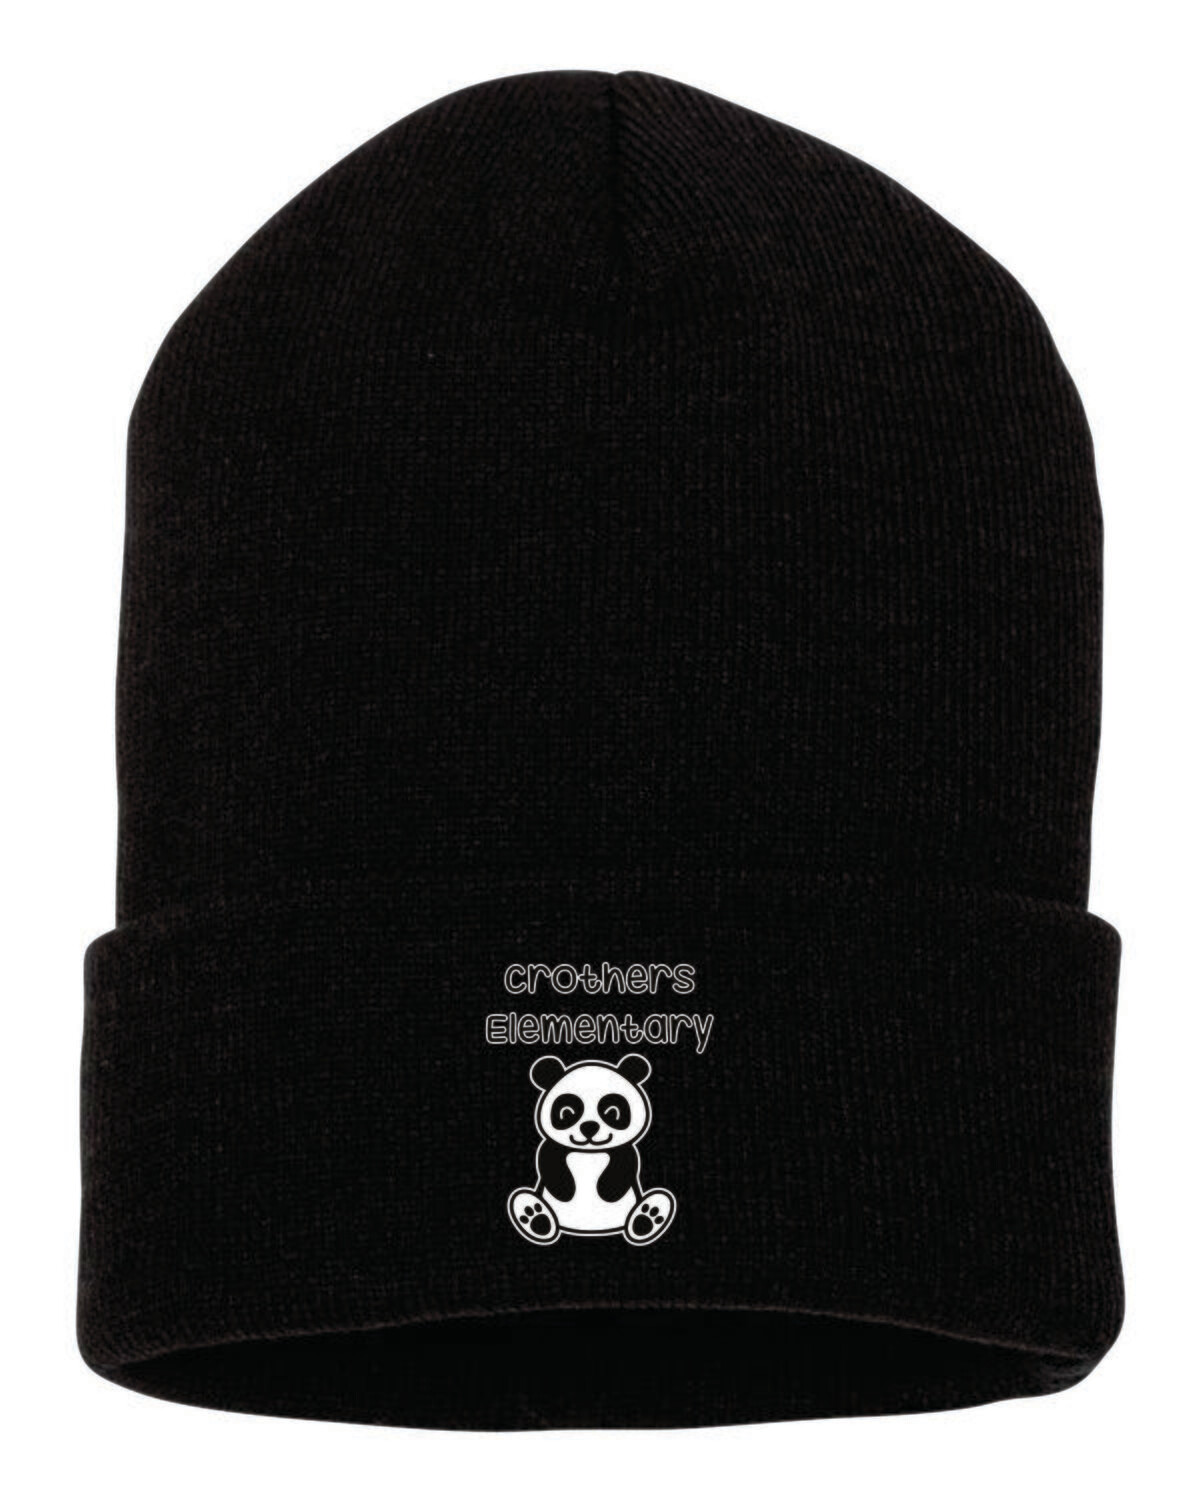 Crothers Elementary Beanie